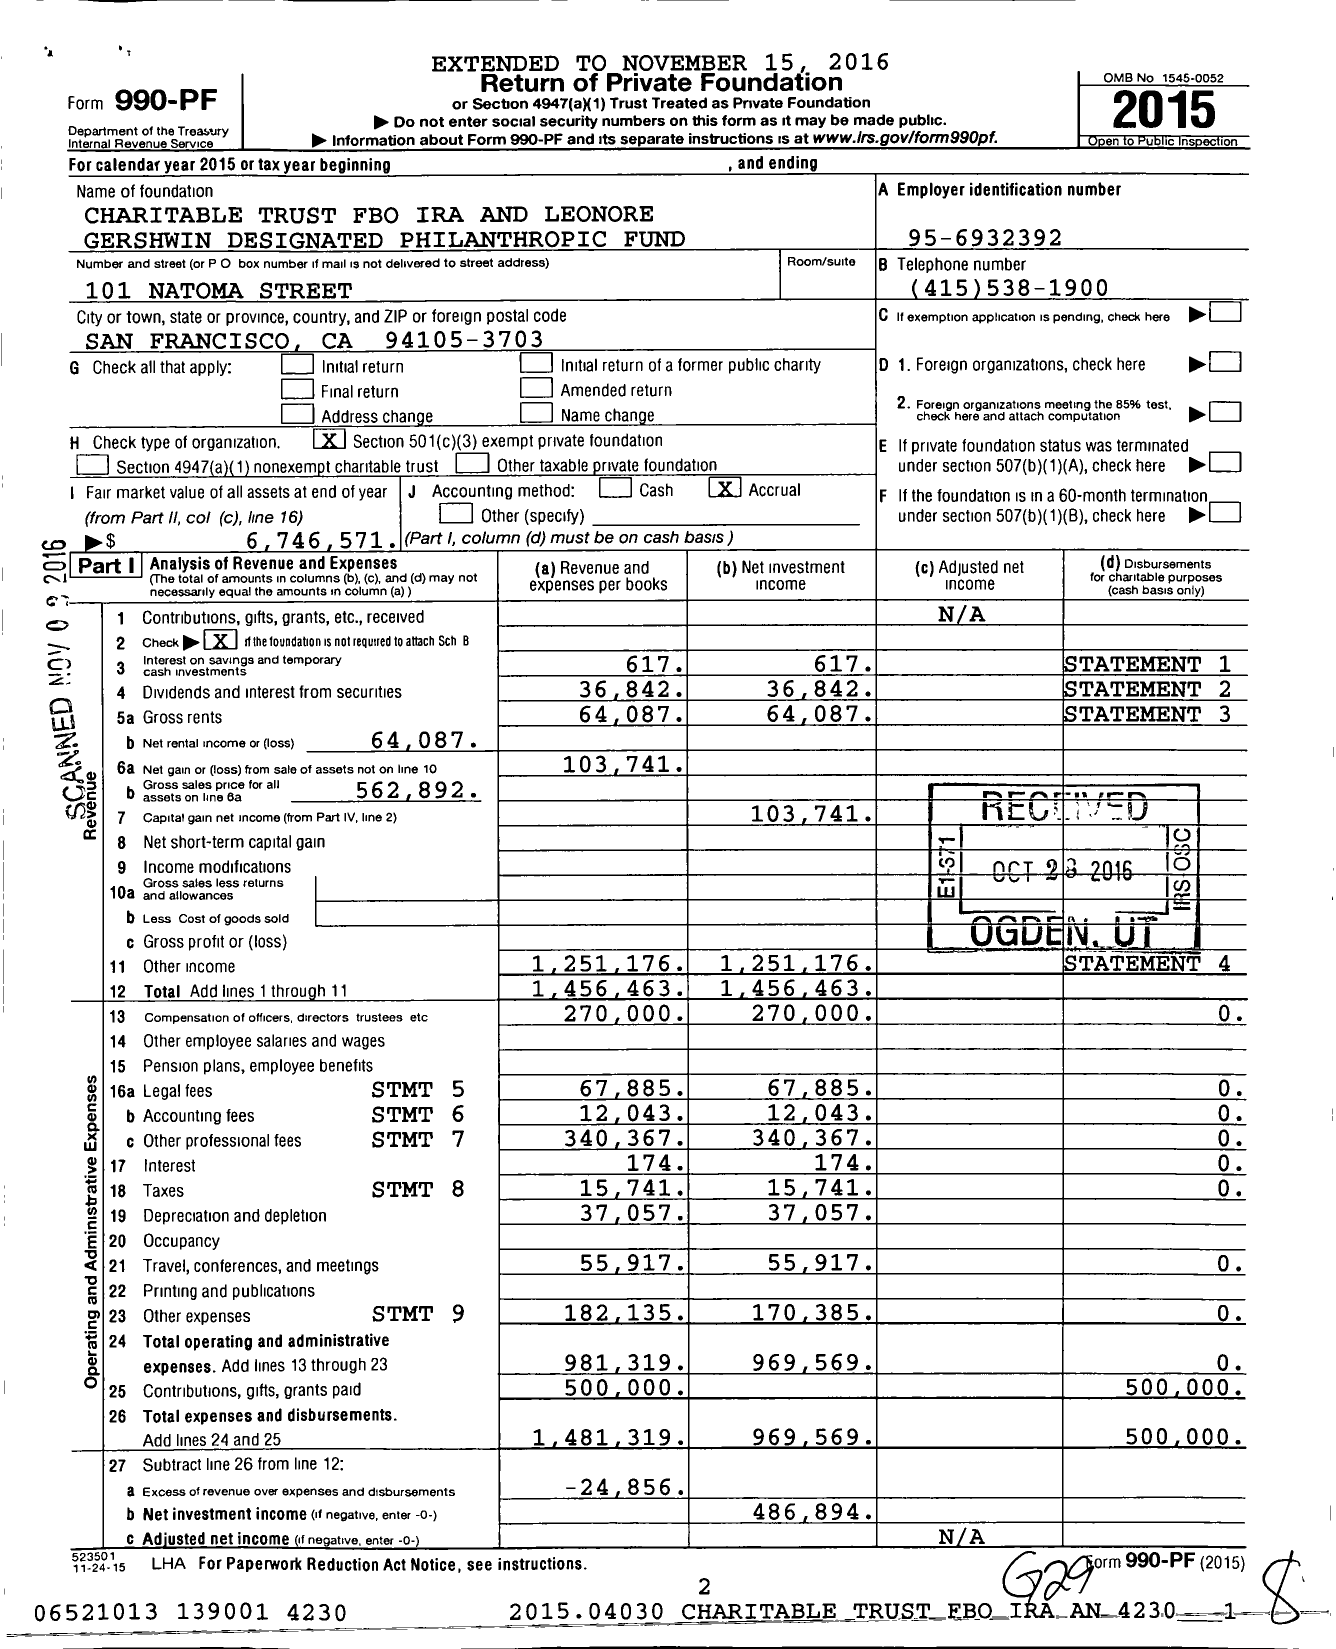 Image of first page of 2015 Form 990PF for Charitable Trust FBO Ira and Leonore Gershwin Designated Philanthropic Fund